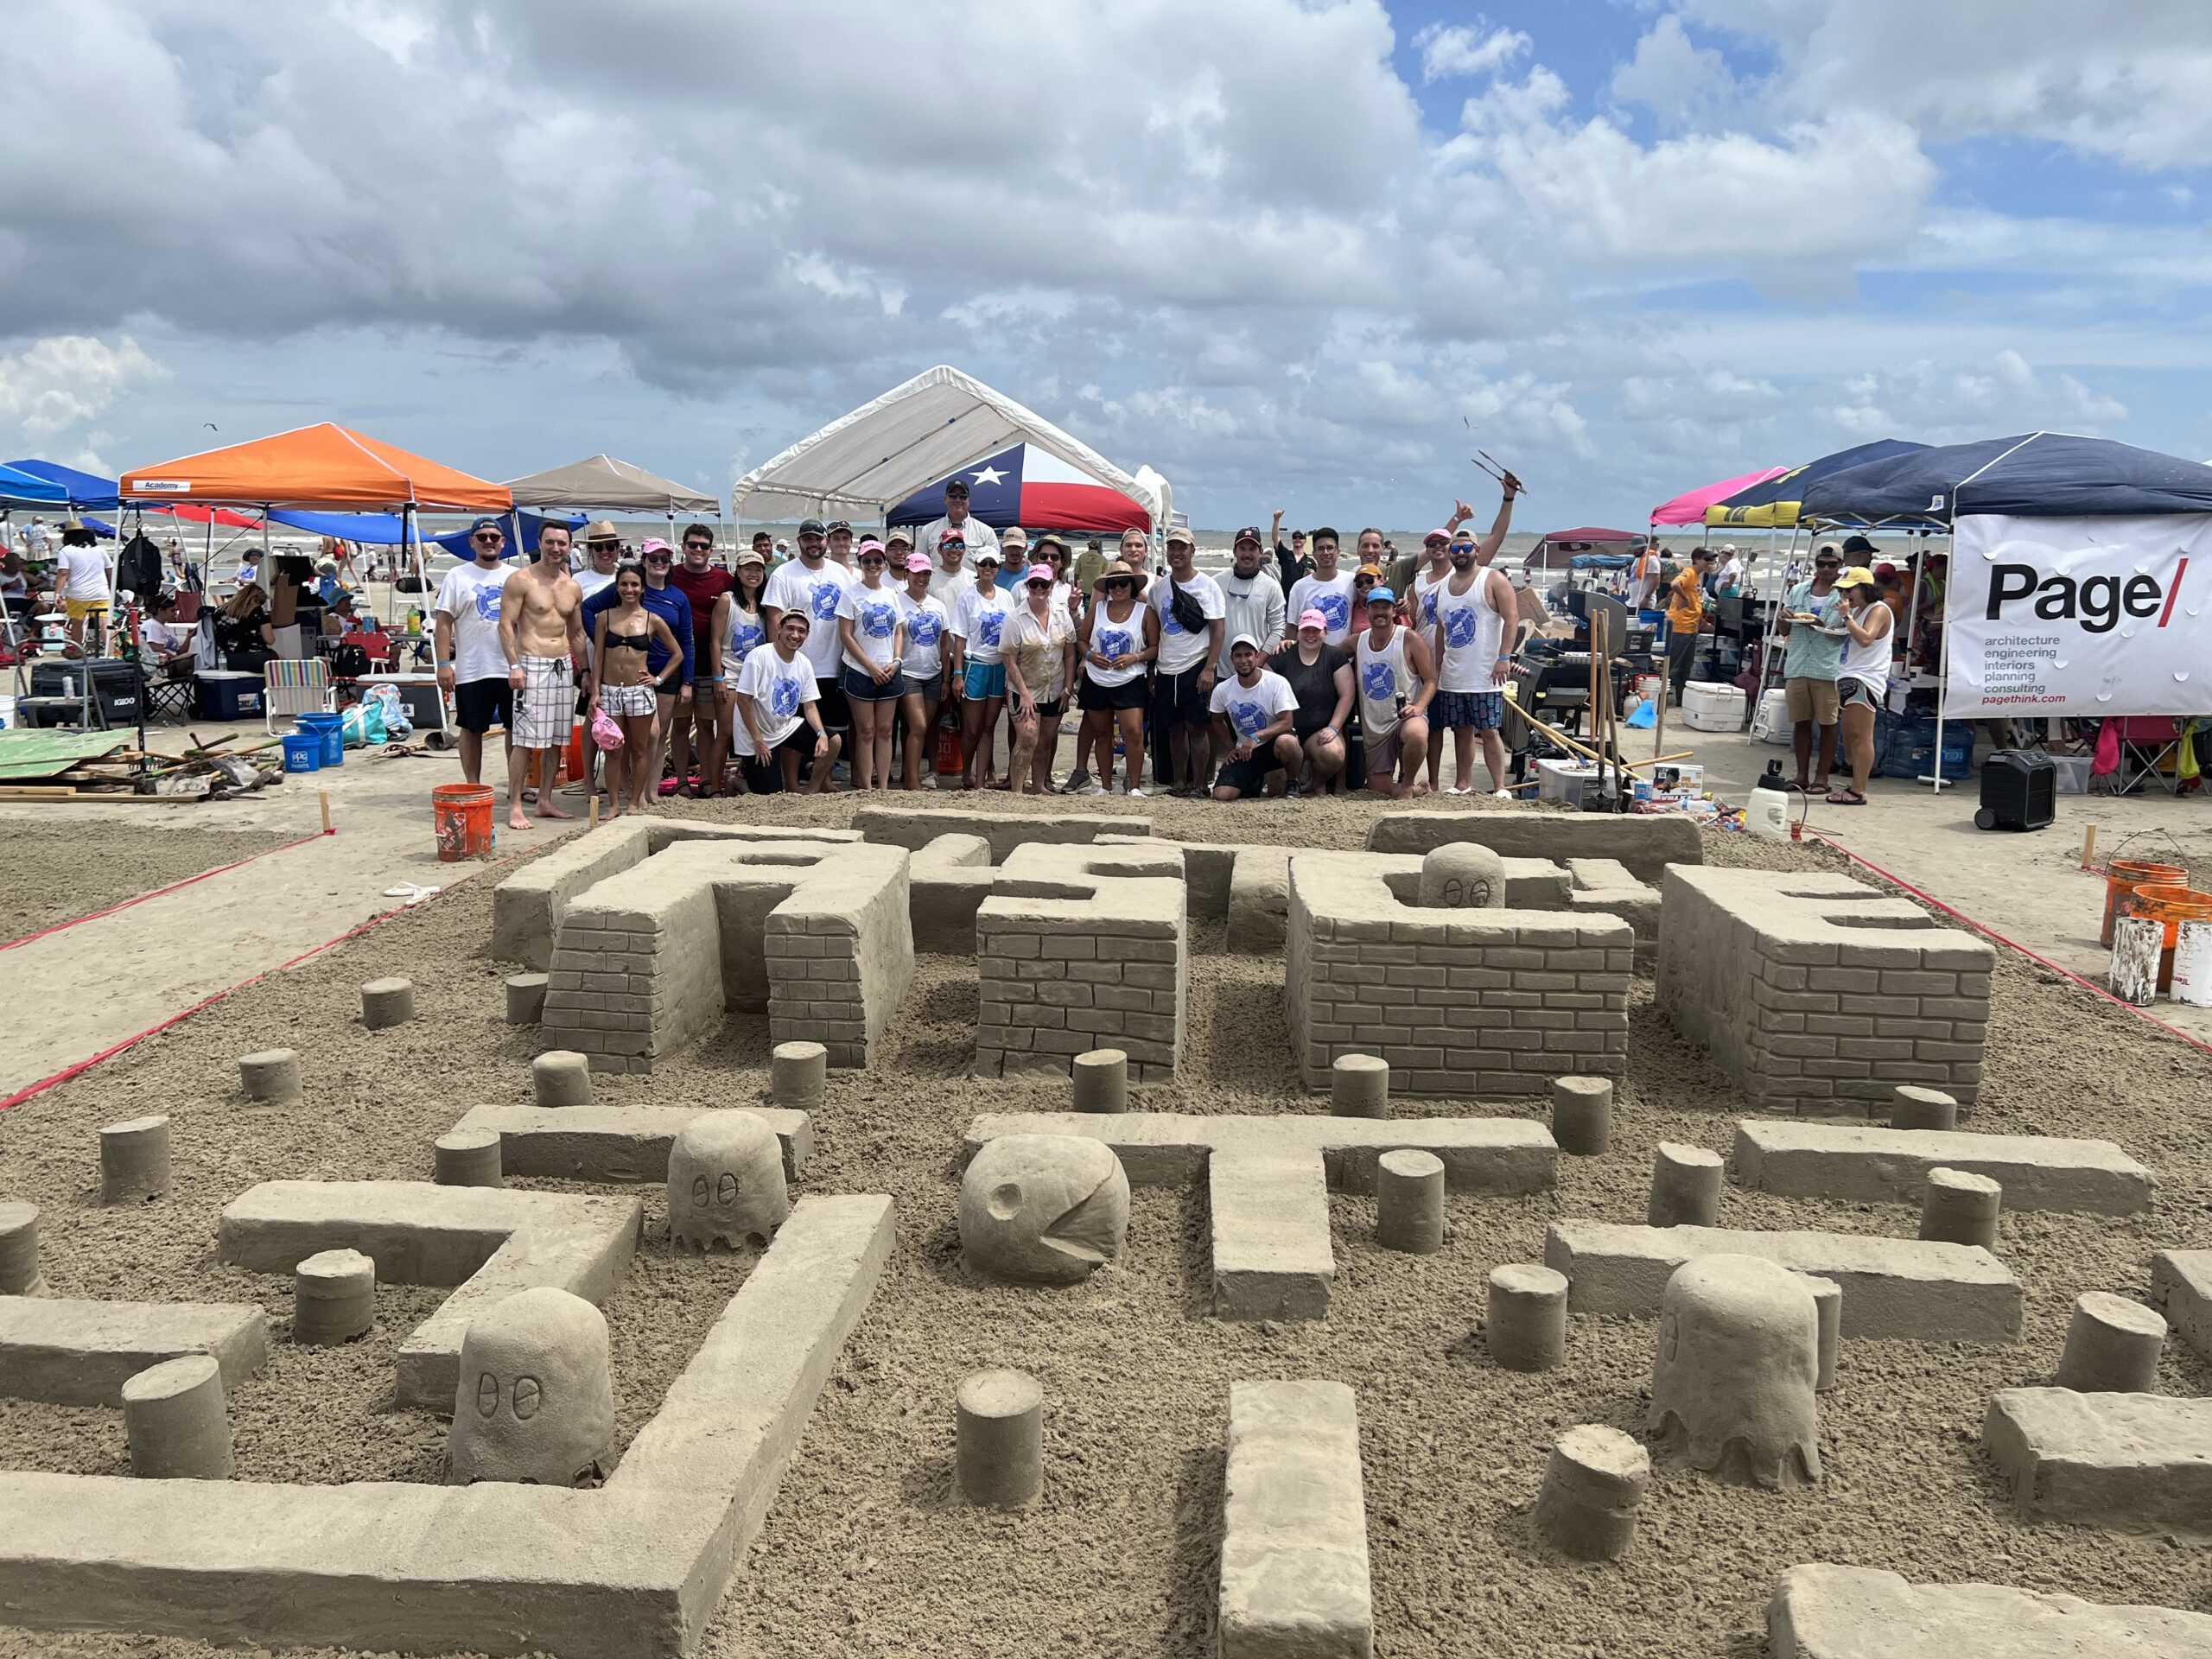 ASCE Sandcastle Competition 2022 American Society of Civil Engineers